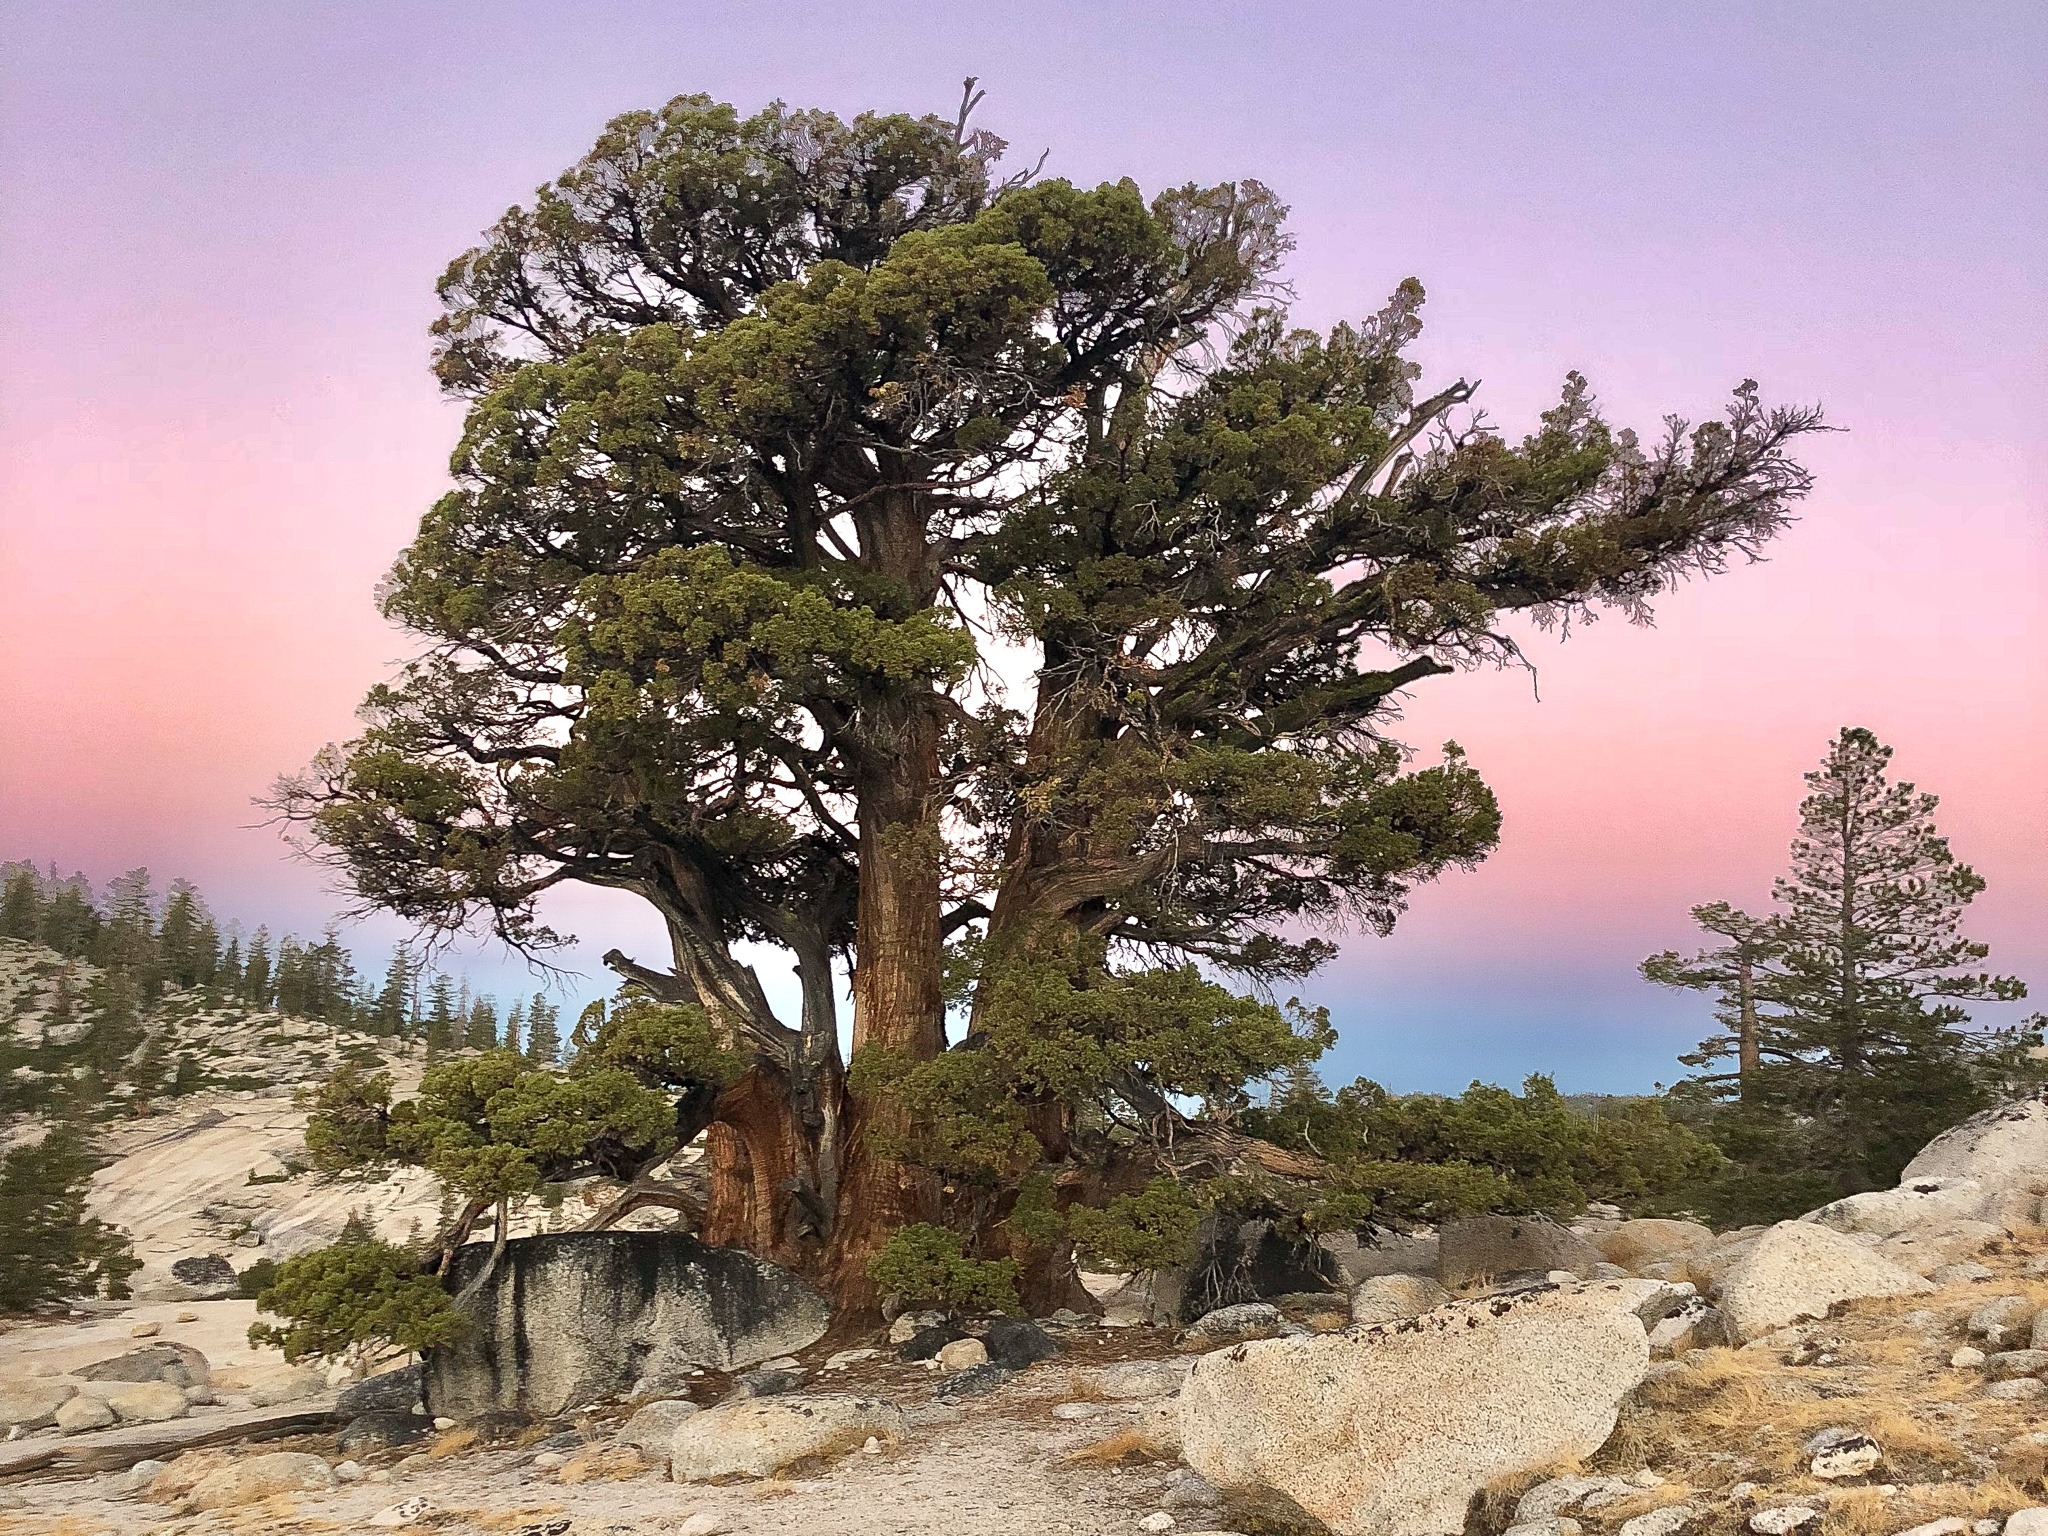 Unique Yosemite experiences include forest bathing in scenes such as this with the sun setting behind a  stand of junipers.